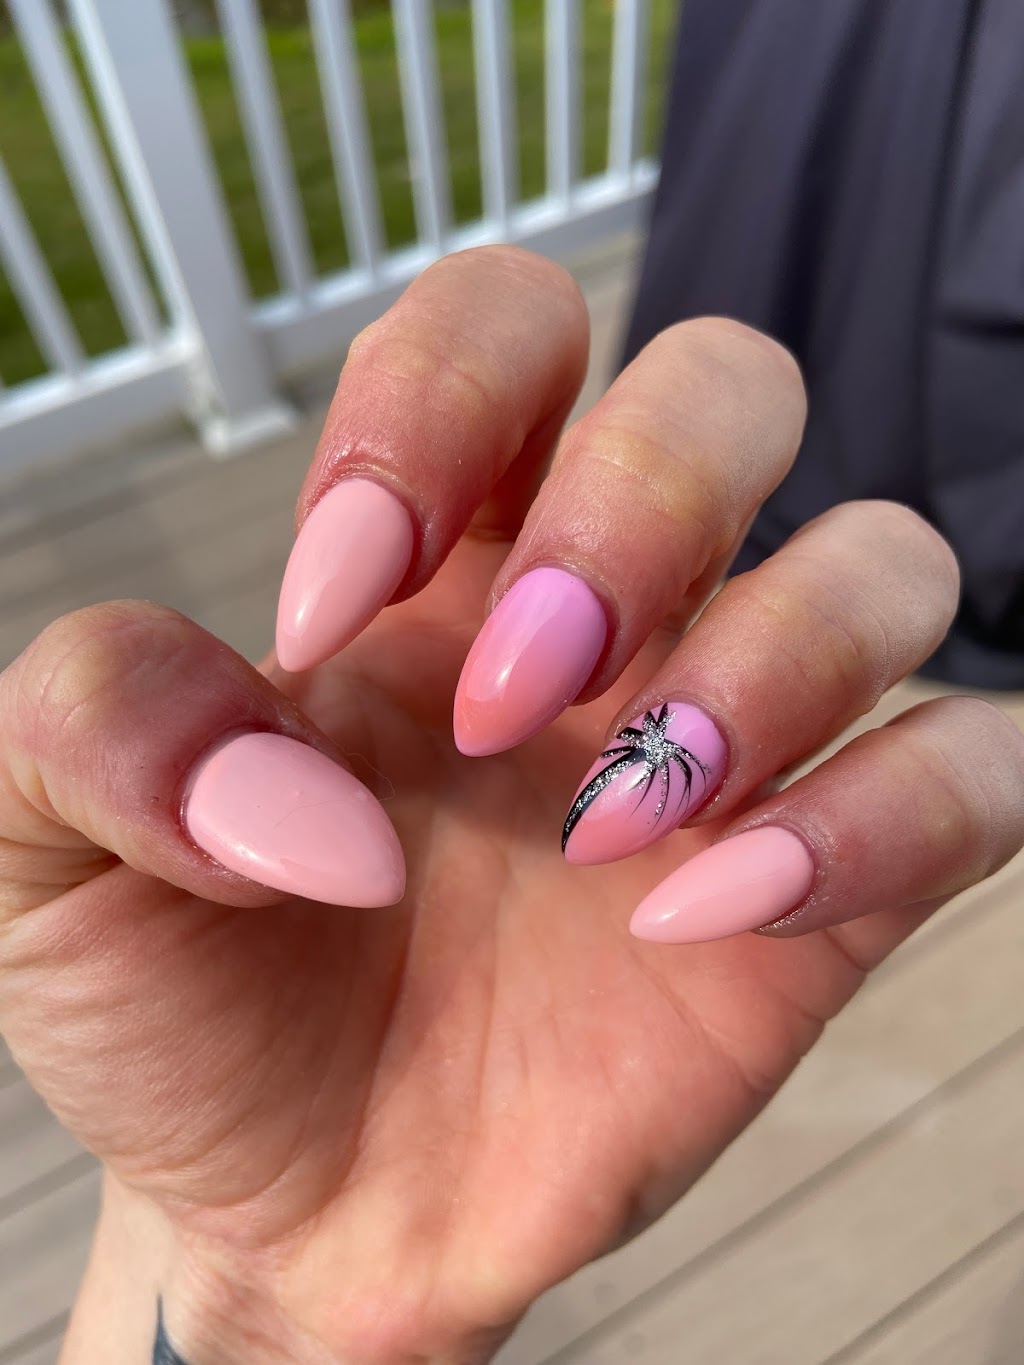 Glamour Nails | 3811 Center Rd, Brunswick, OH 44212 | Phone: (330) 220-5876